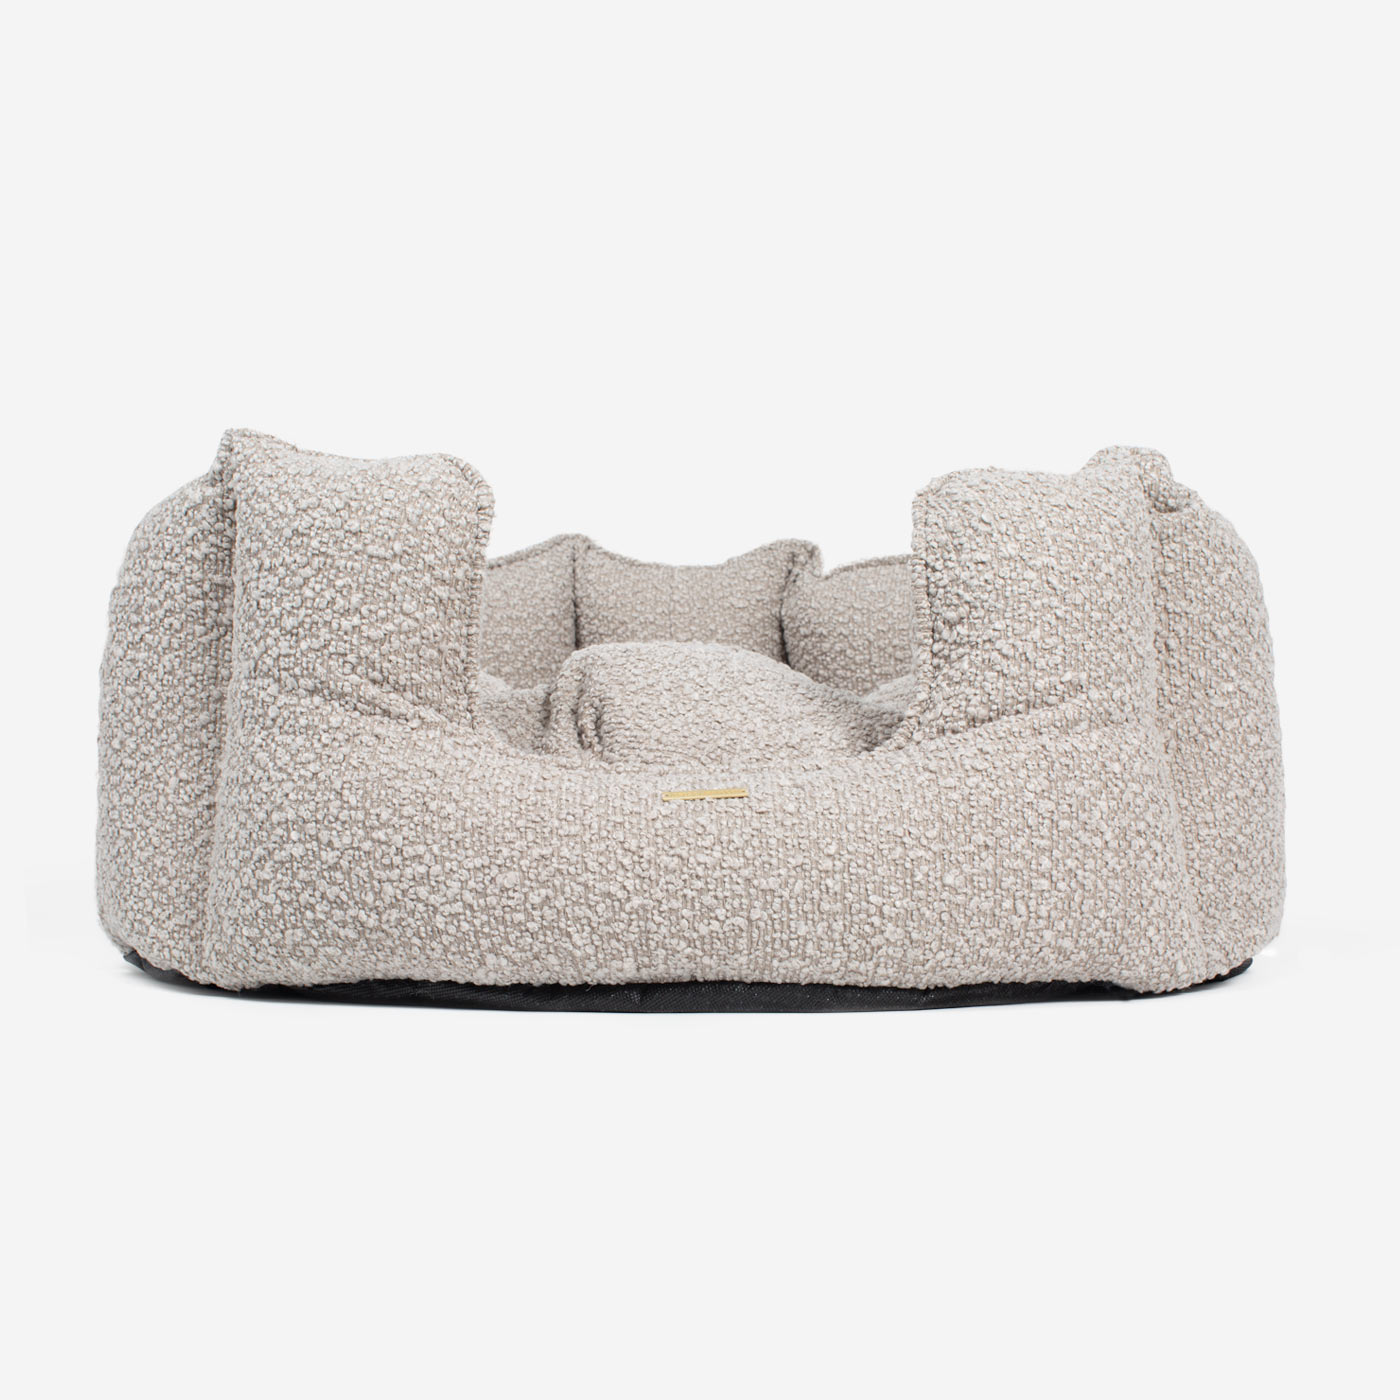 [color:mink boucle] Discover Our Luxurious High Wall Bed For Cats & Kittens, Featuring inner pillow with plush teddy fleece on one side To Craft The Perfect Cat Bed In Stunning Mink Boucle! Available To Personalize Now at Lords & Labradors US